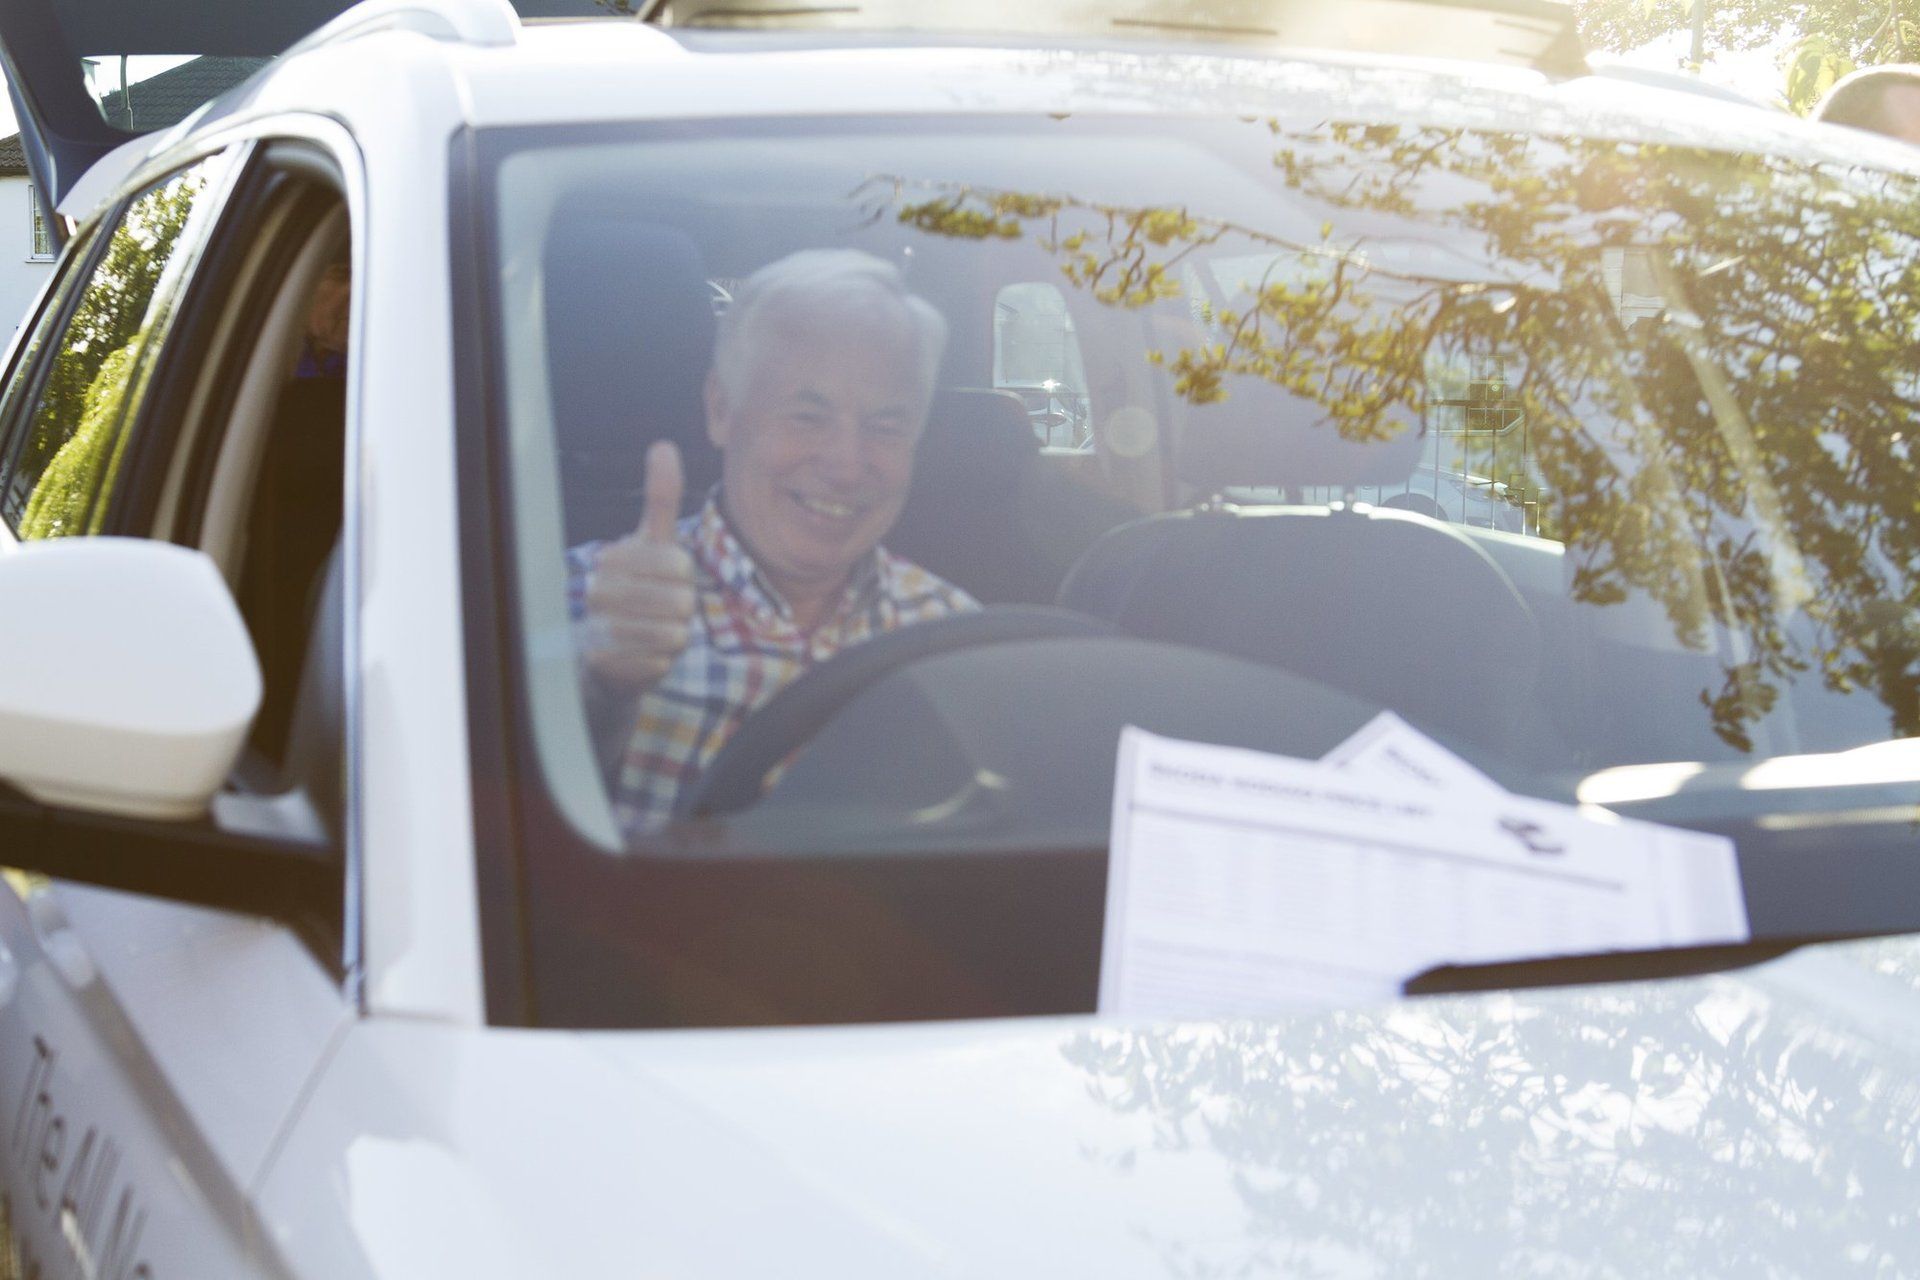 A man is giving a thumbs up while sitting in a car.